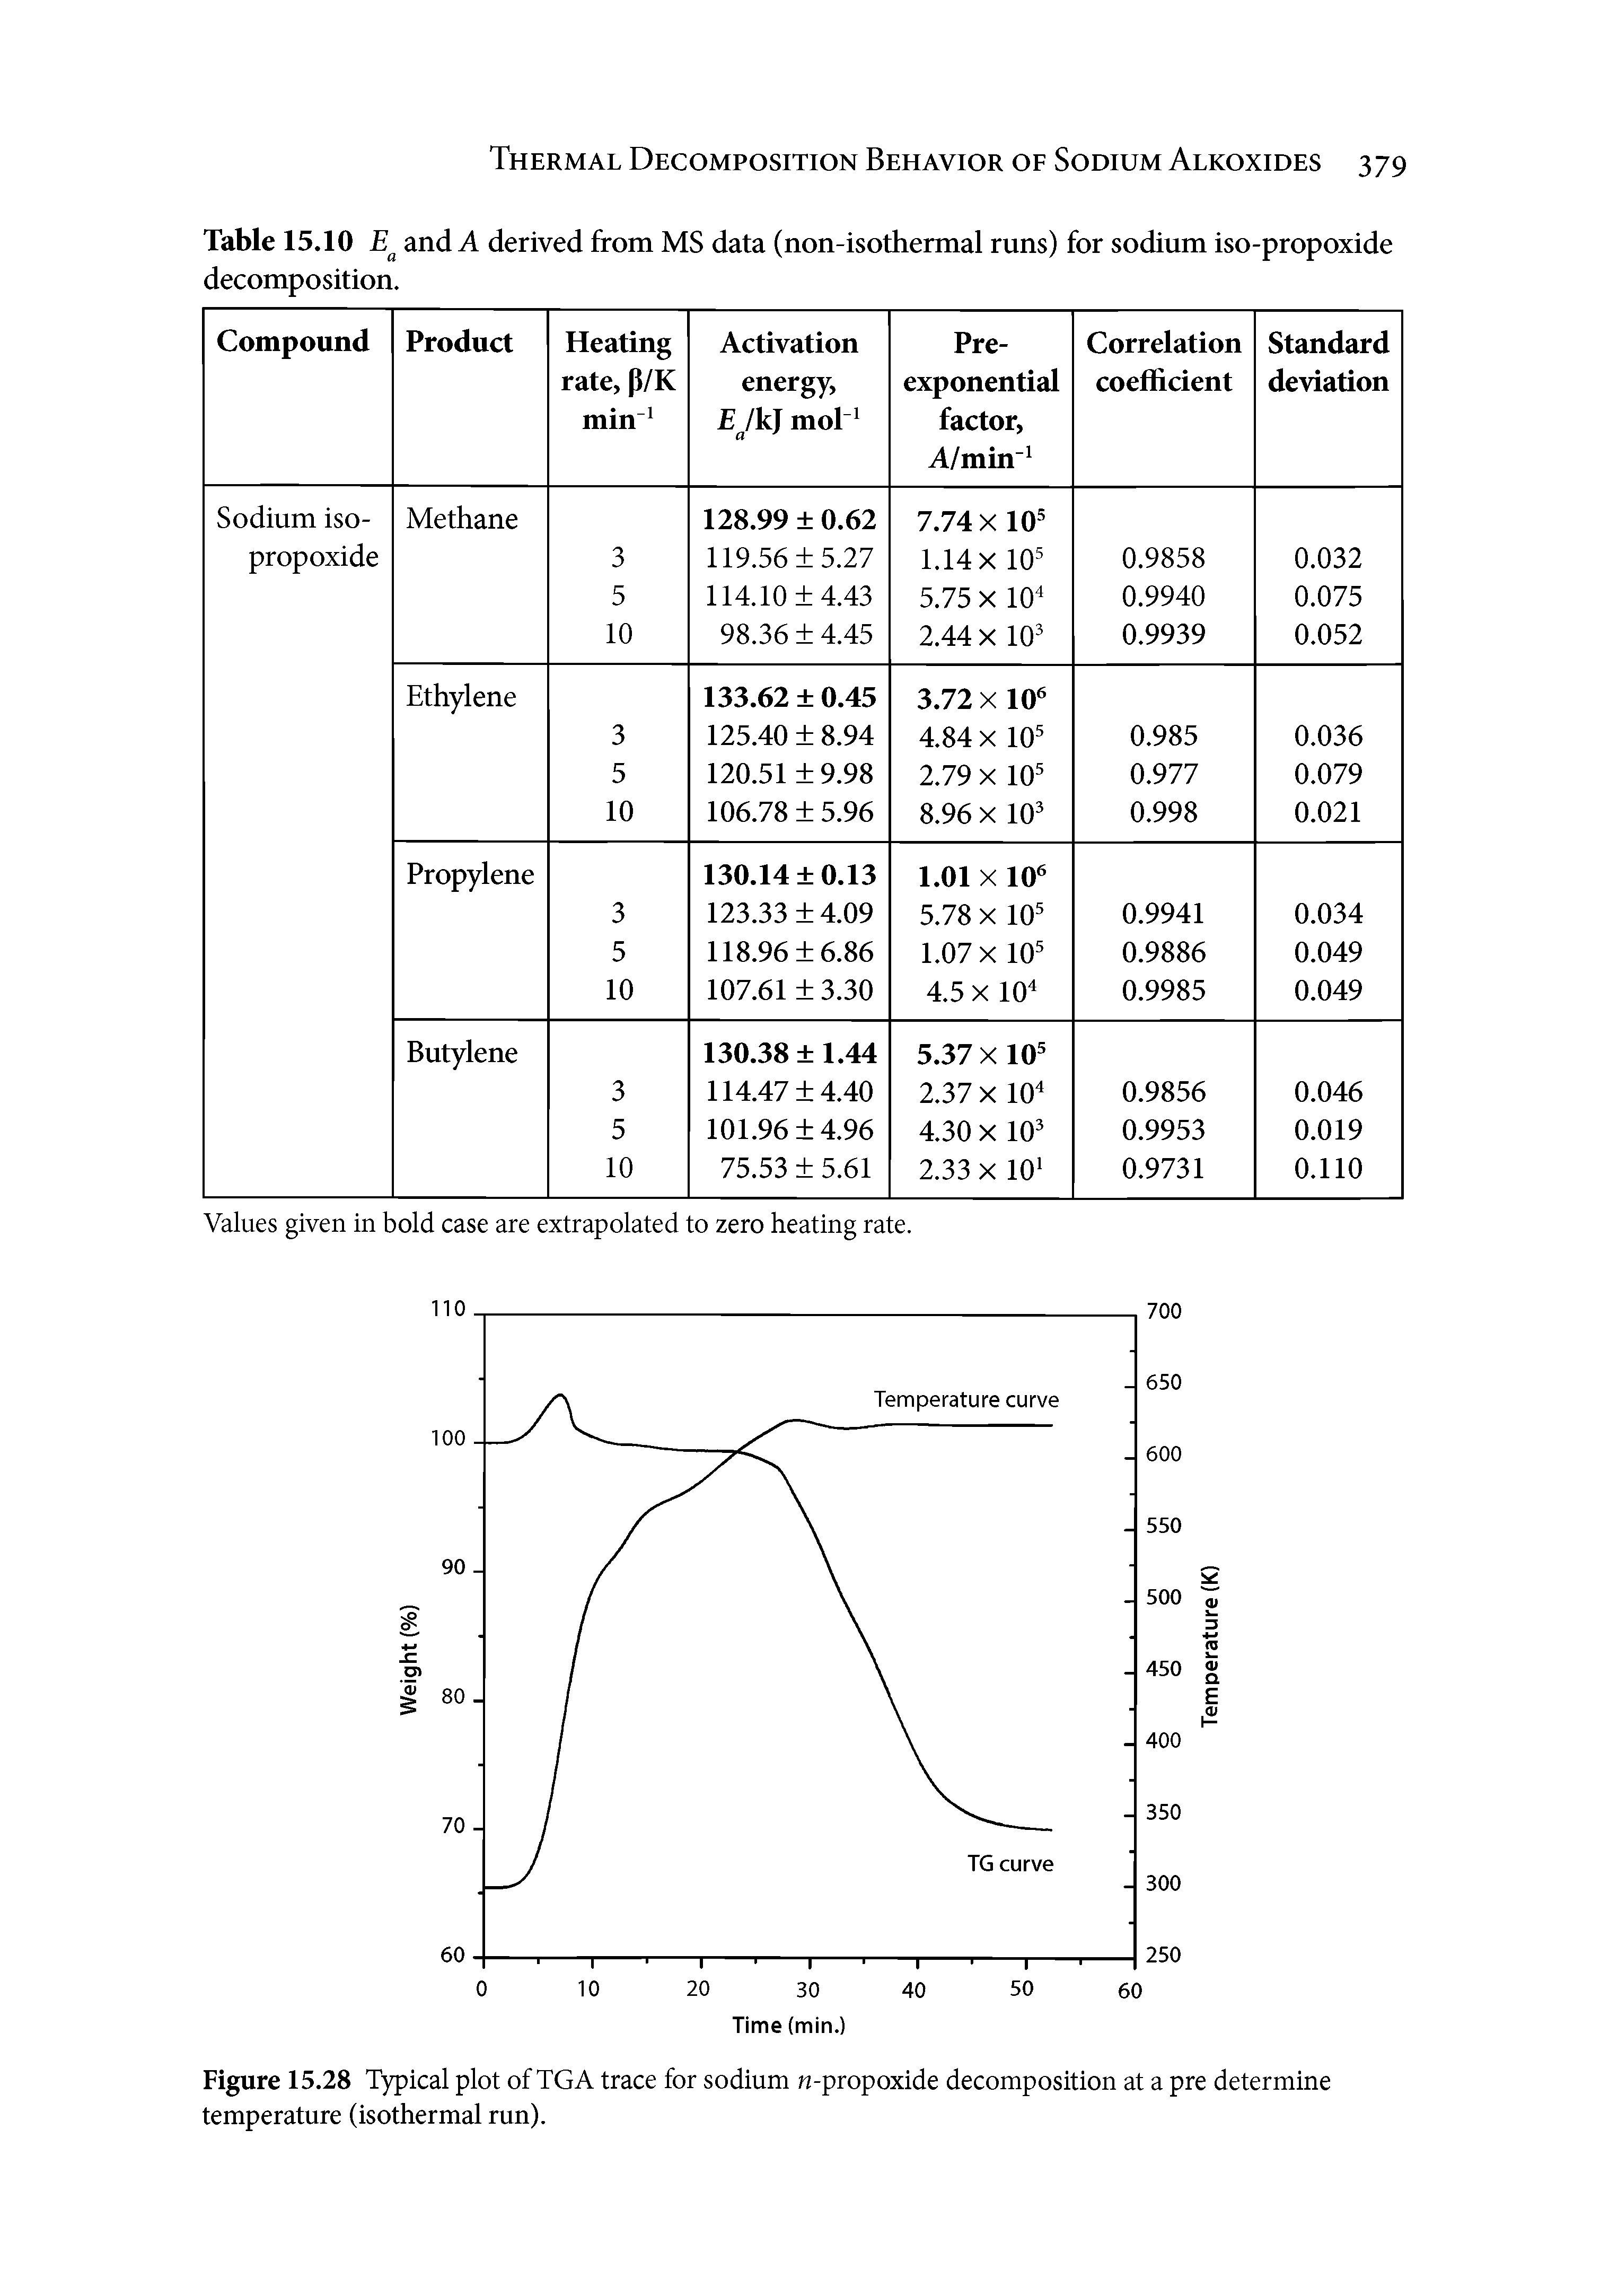 Figure 15.28 Typical plot of TGA trace for sodium n-propoxide decomposition at a pre determine temperature (isothermal run).